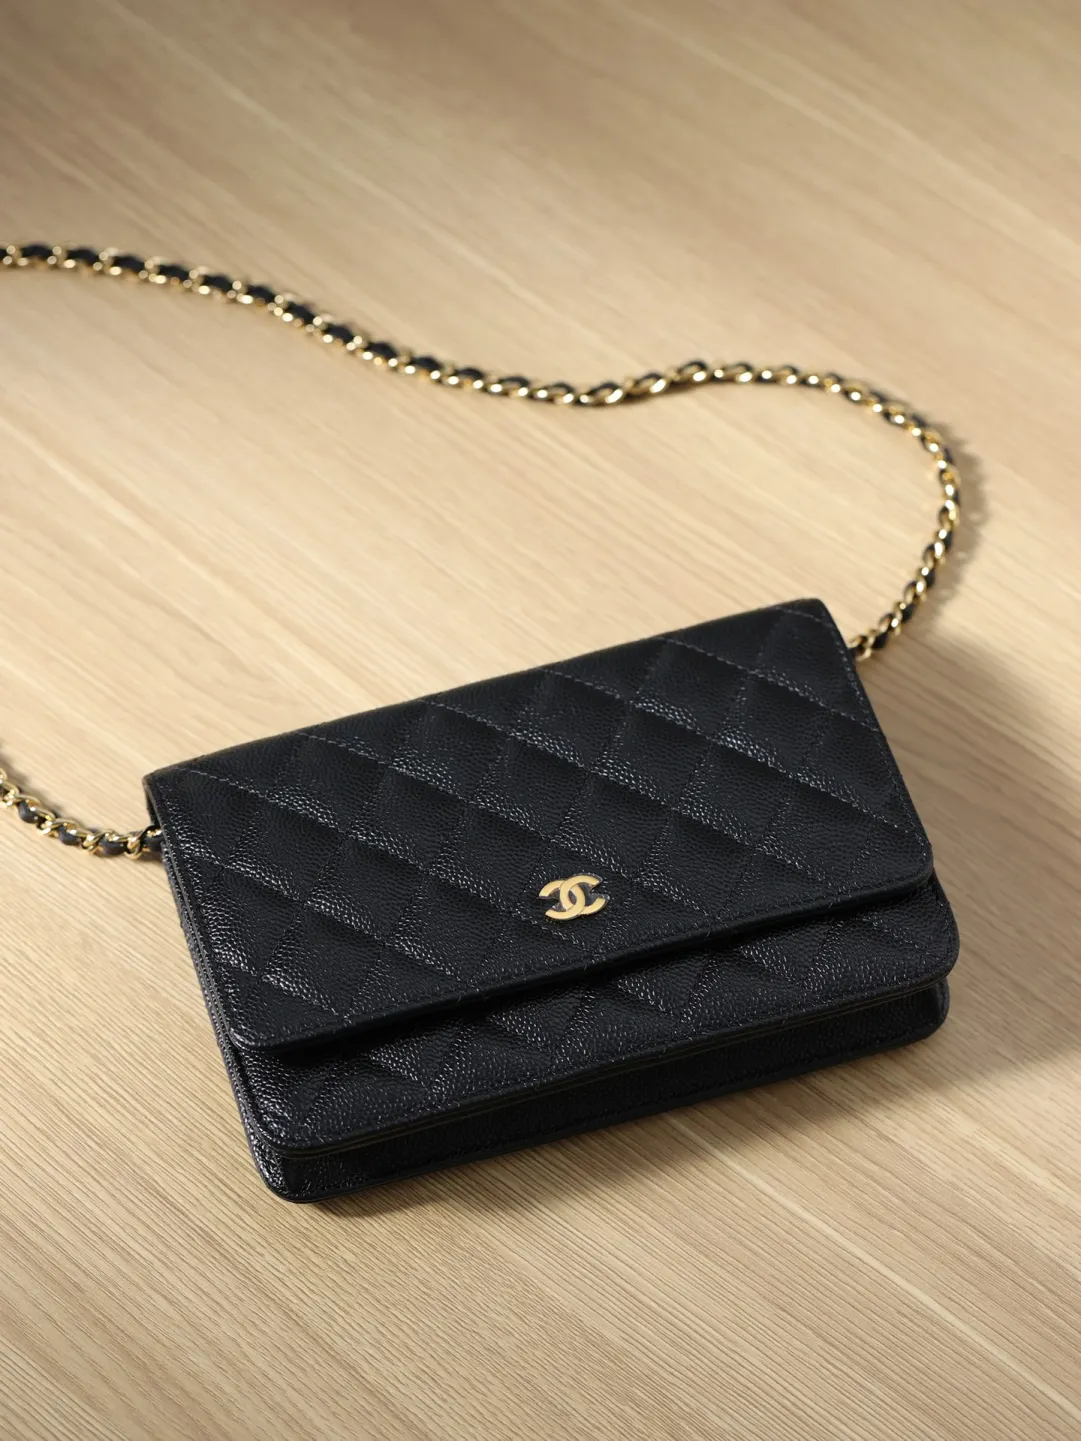 What is the replica Chanel price? - Quora